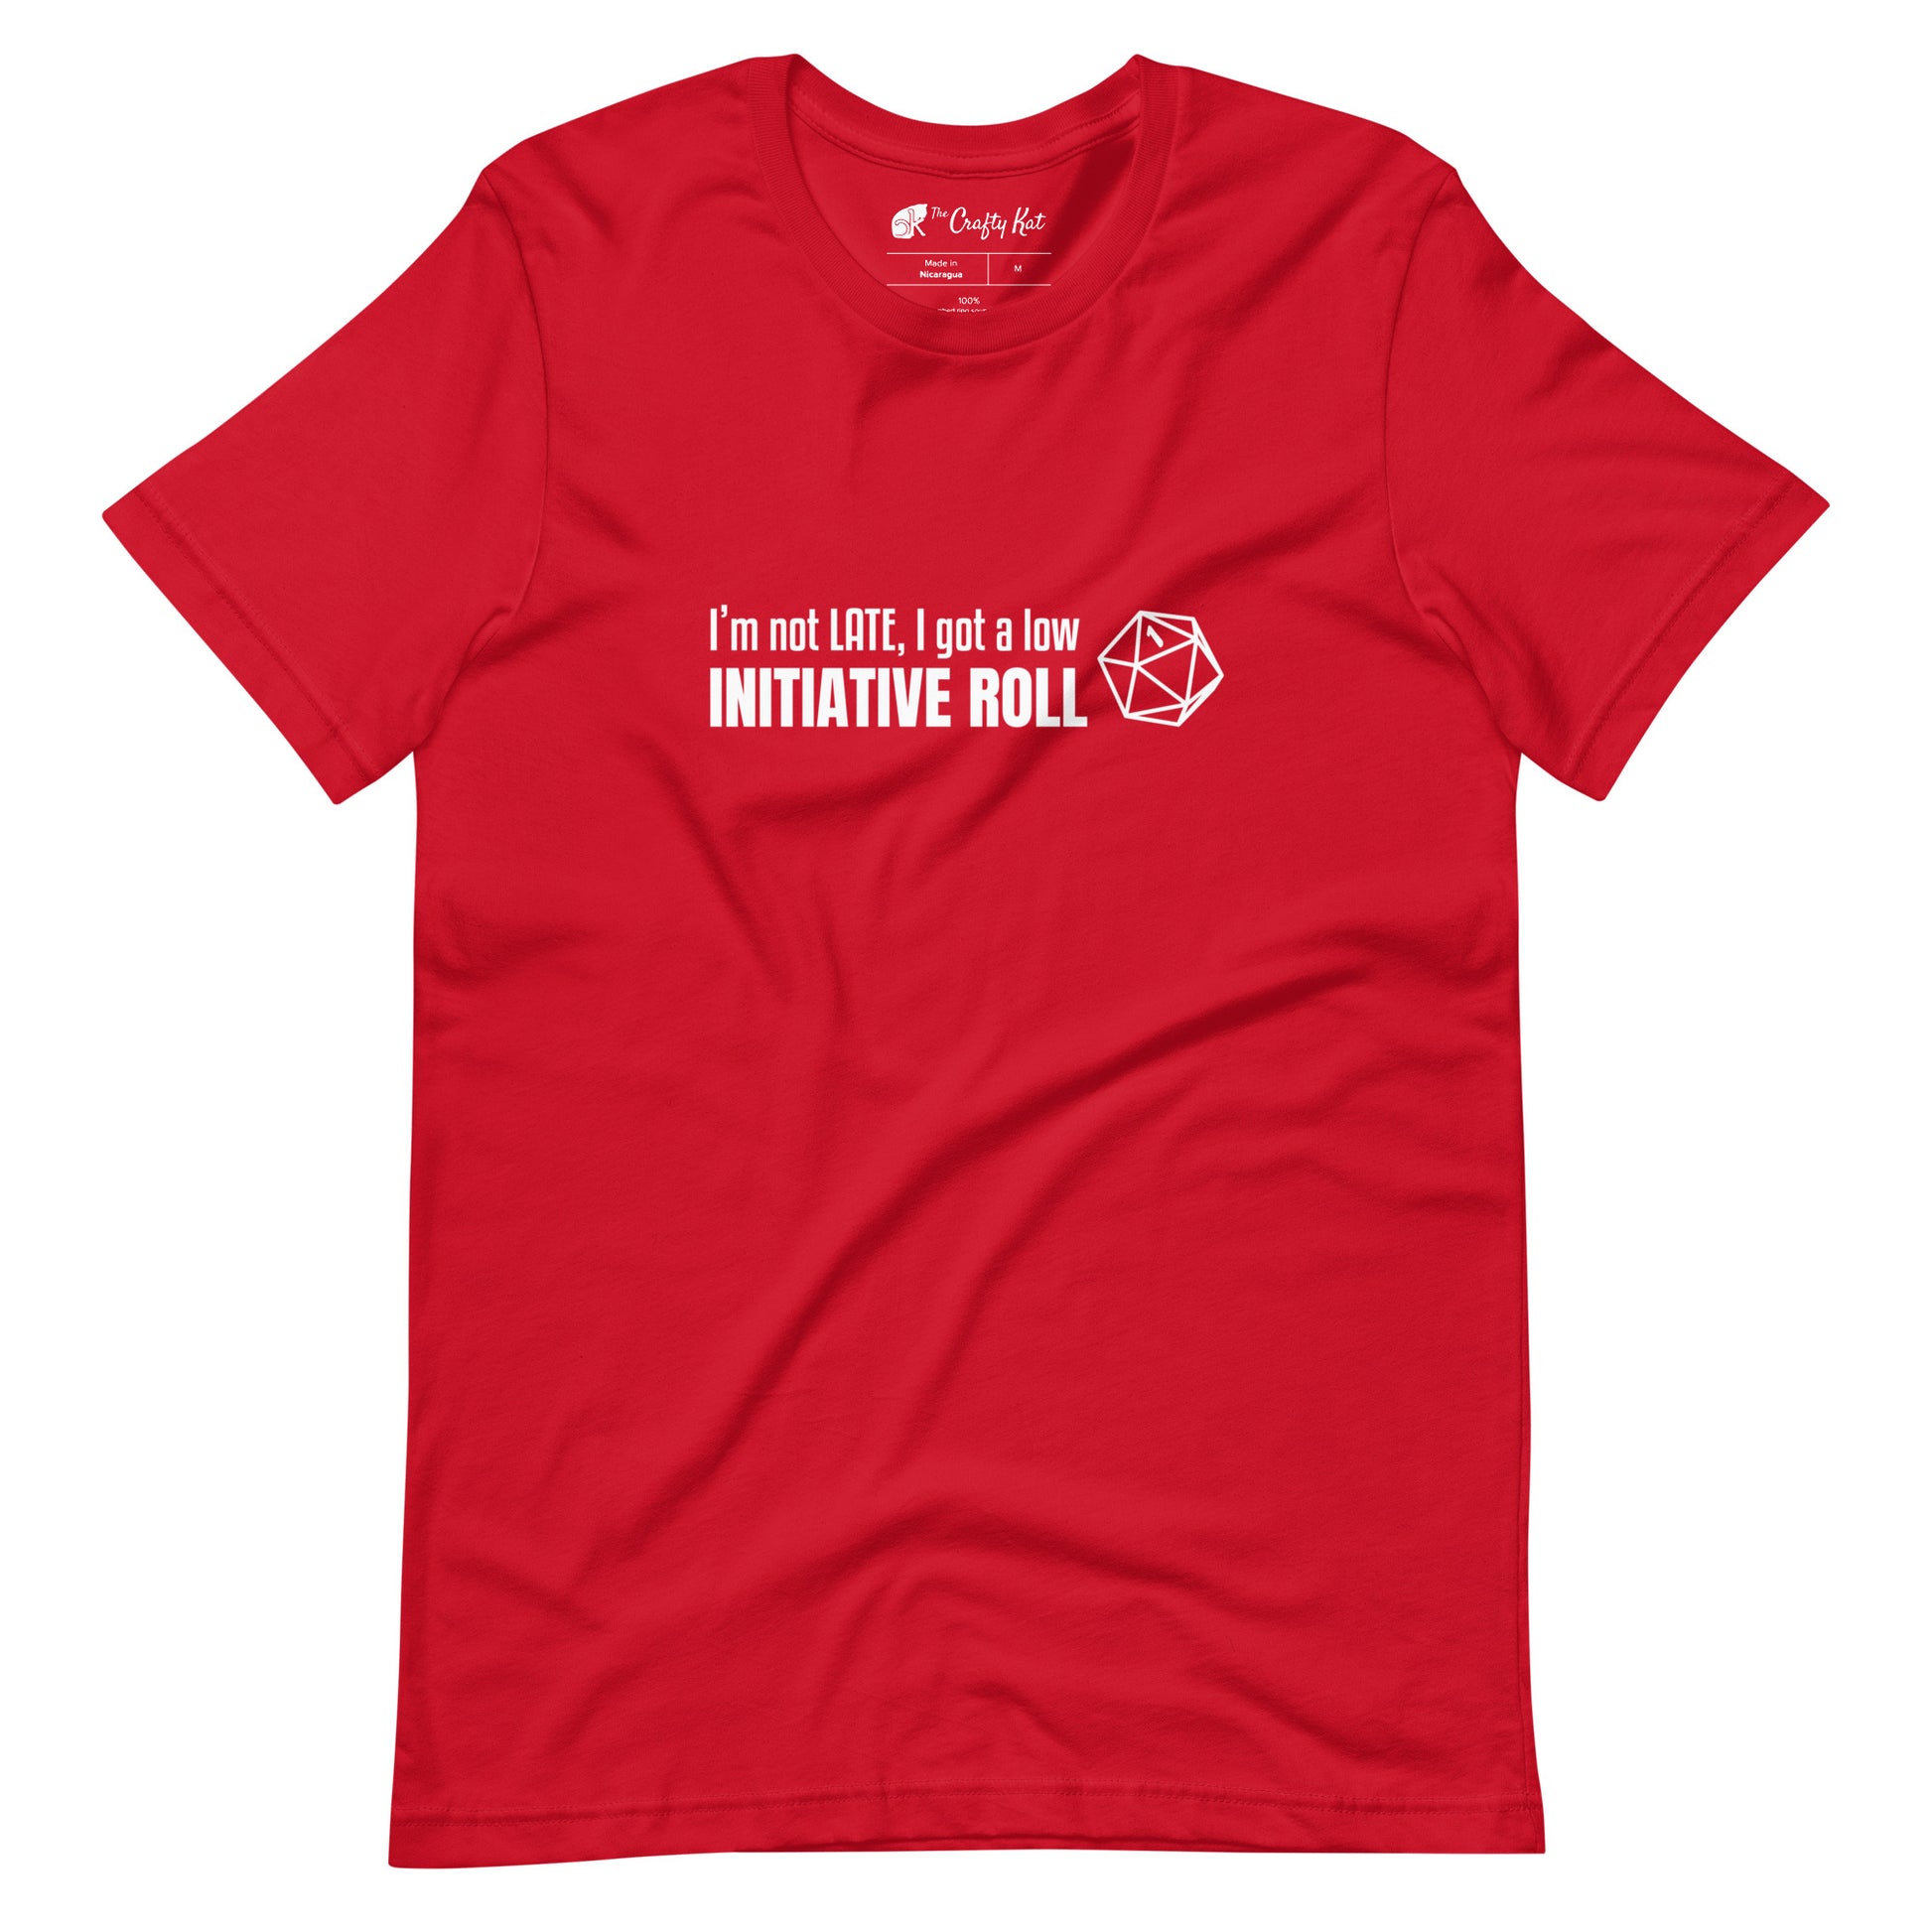 Red unisex t-shirt with a graphic of a d20 (twenty-sided die) showing a roll of "1" and text: "I'm not LATE, I got a low INITIATIVE ROLL"